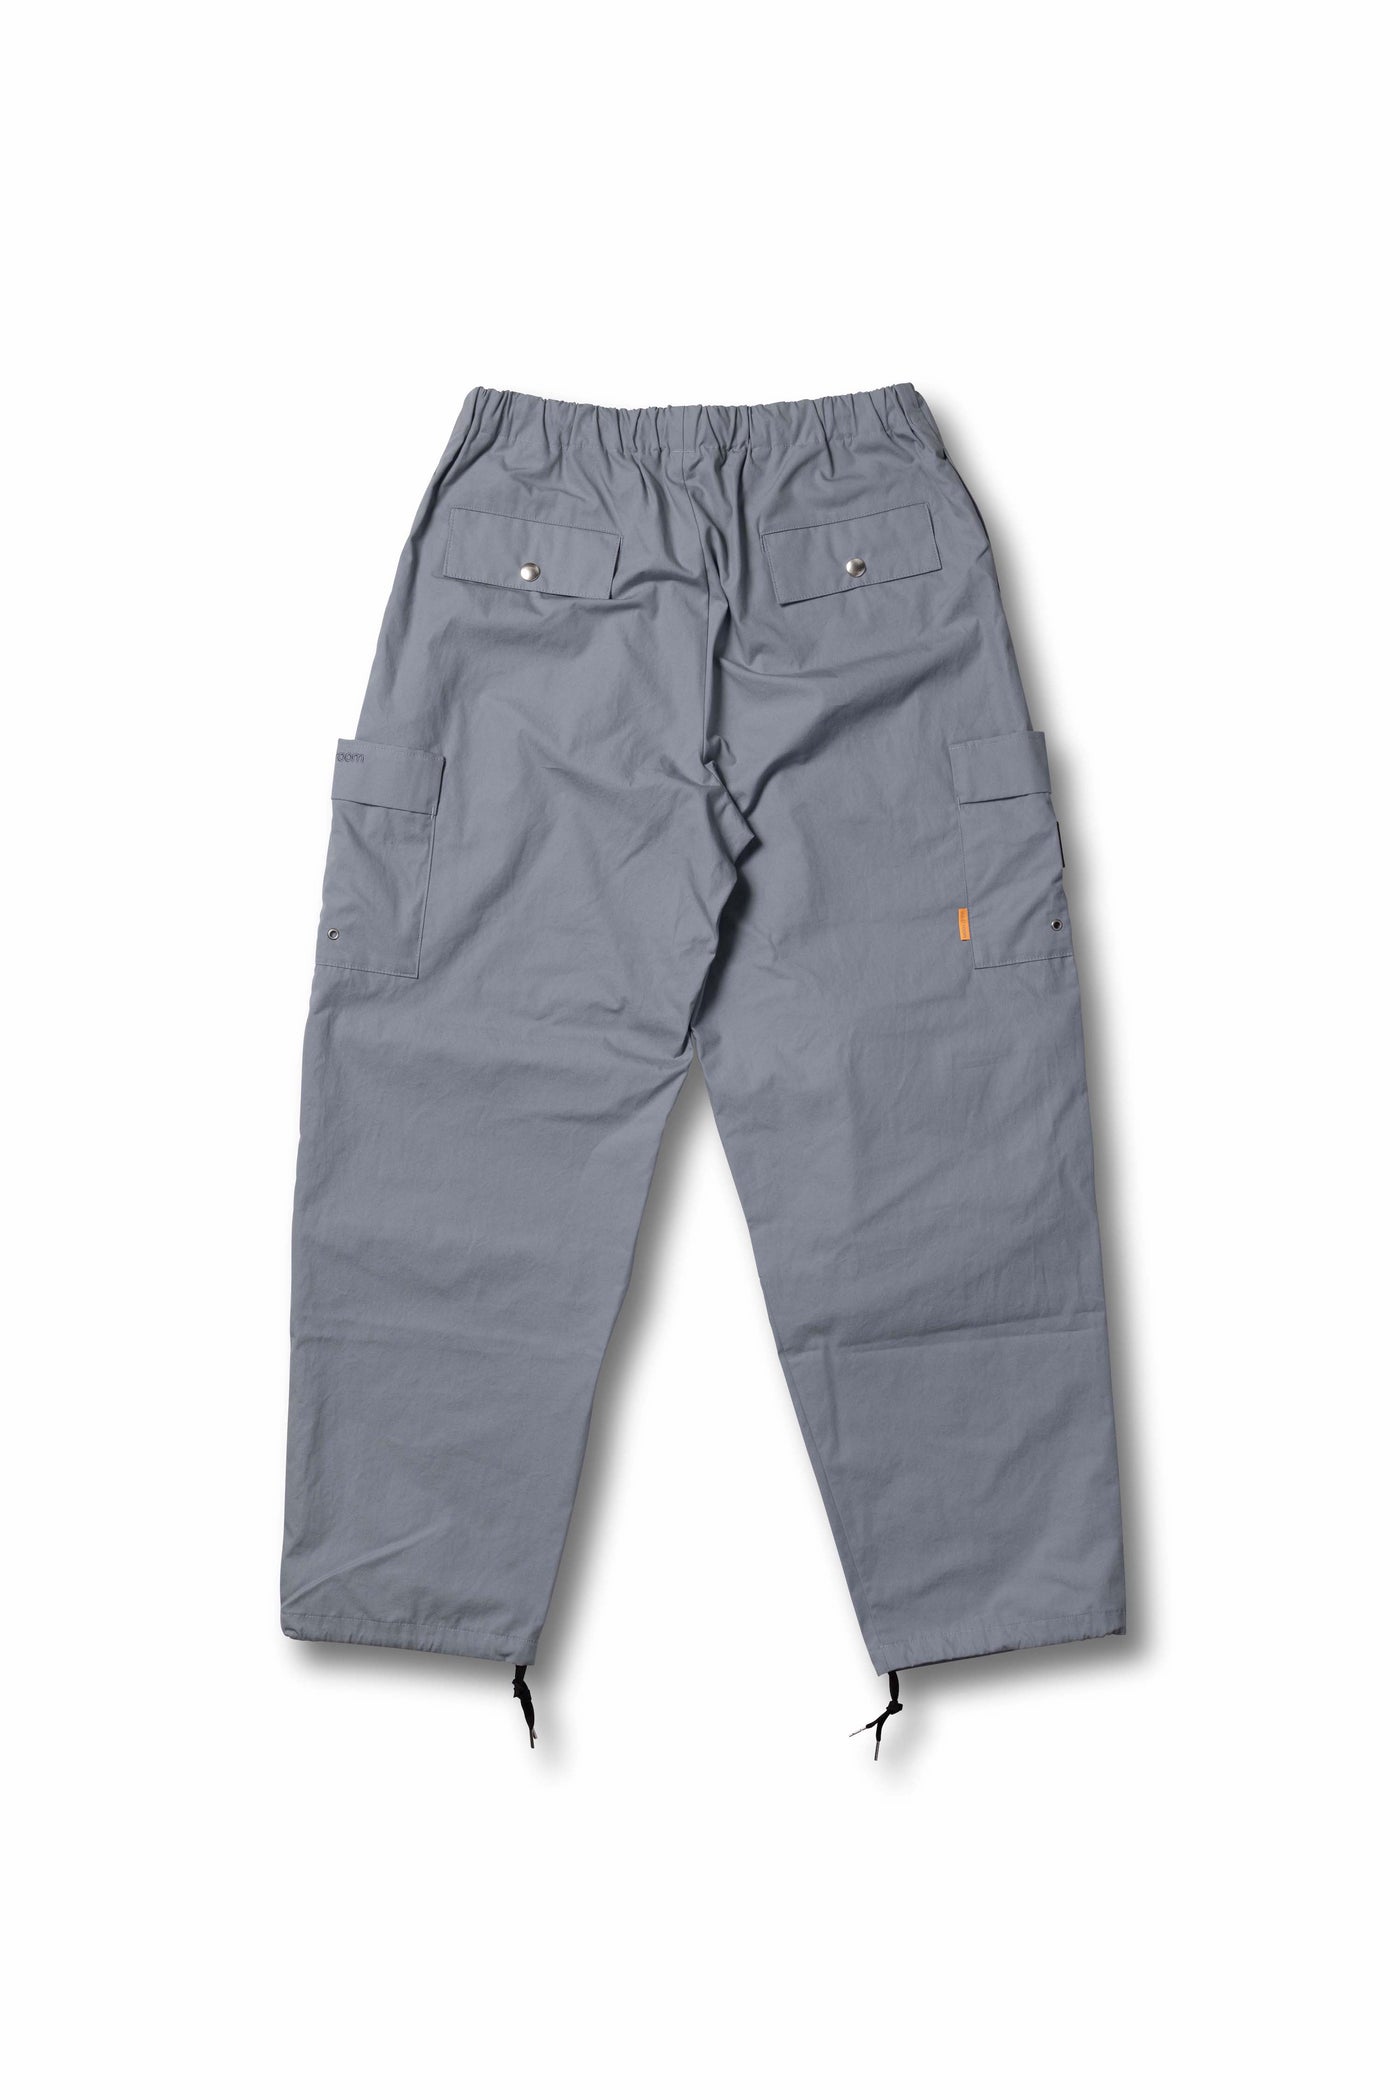 WTAPS 21AW ARMSTRONG TROUSERS OD カーゴ パンツ - パンツ